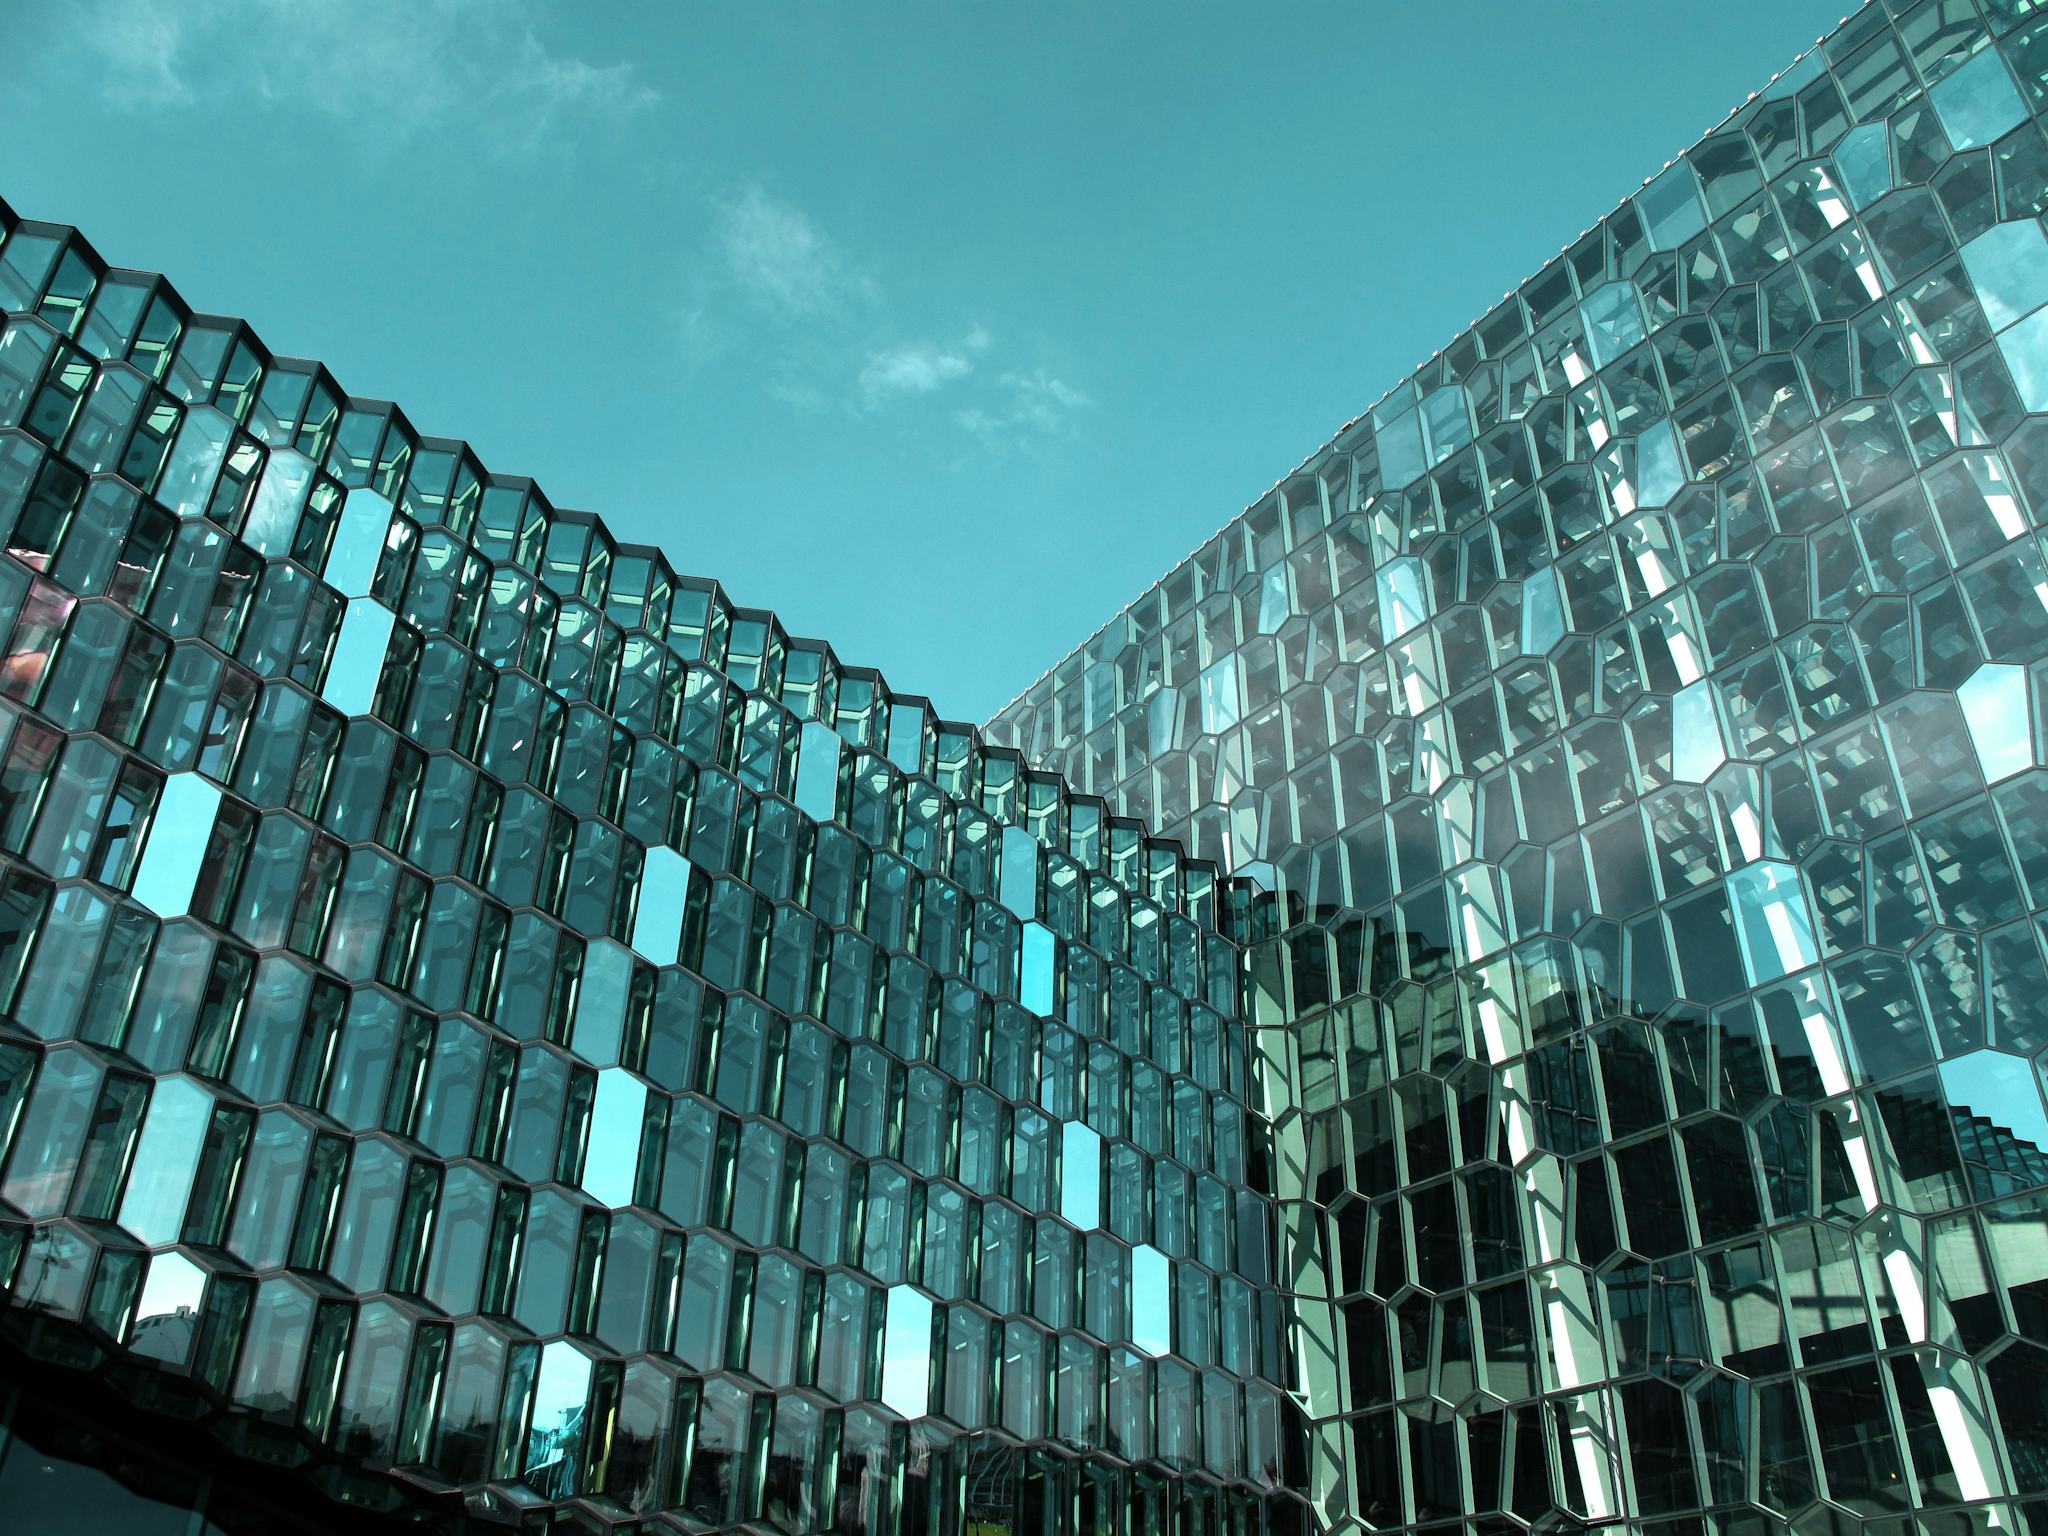 A close-up photo of a modern building with distinct geometric glass panel design